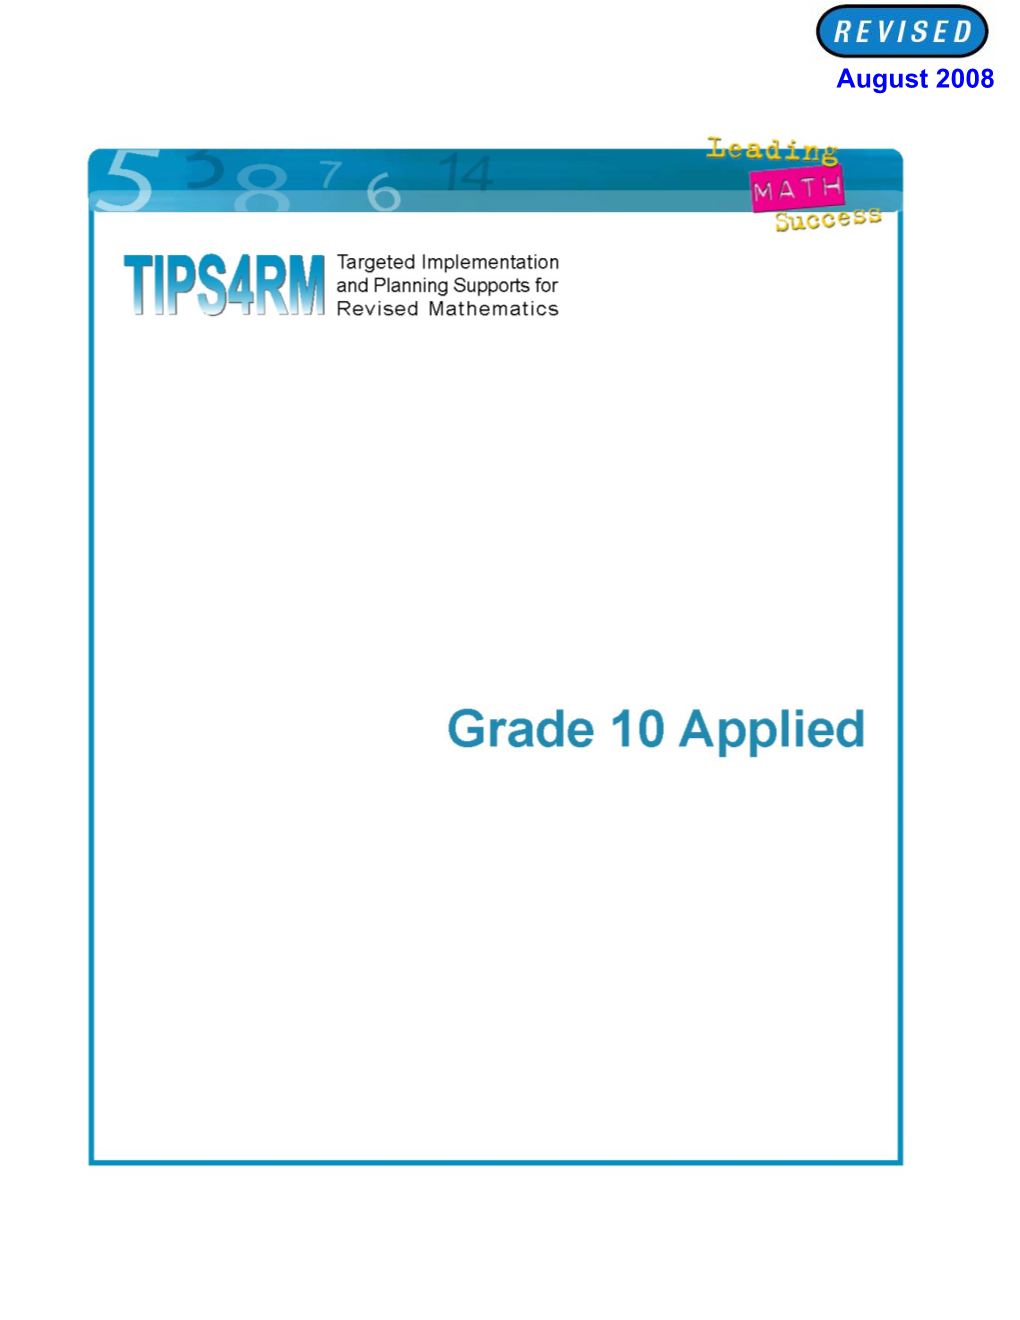 Grade 10 Applied: Content and Reporting Targets